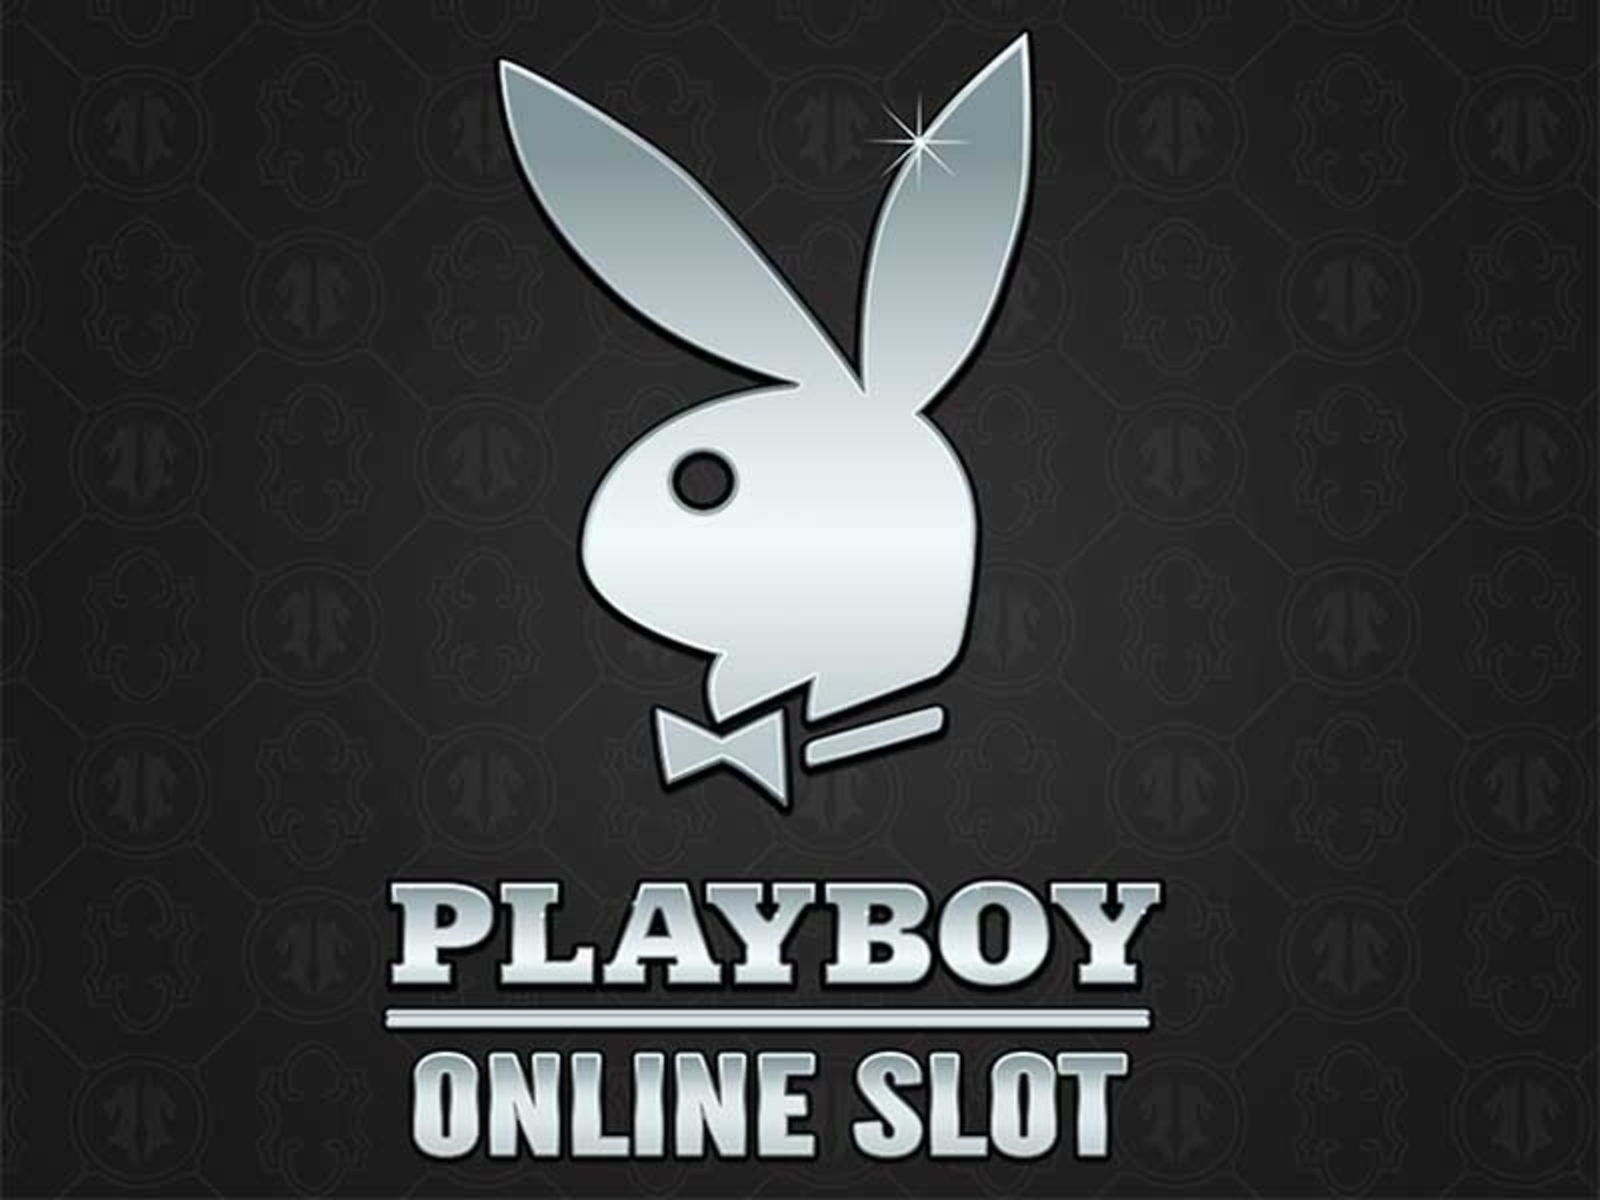 The Playboy Online Slot Demo Game by Microgaming